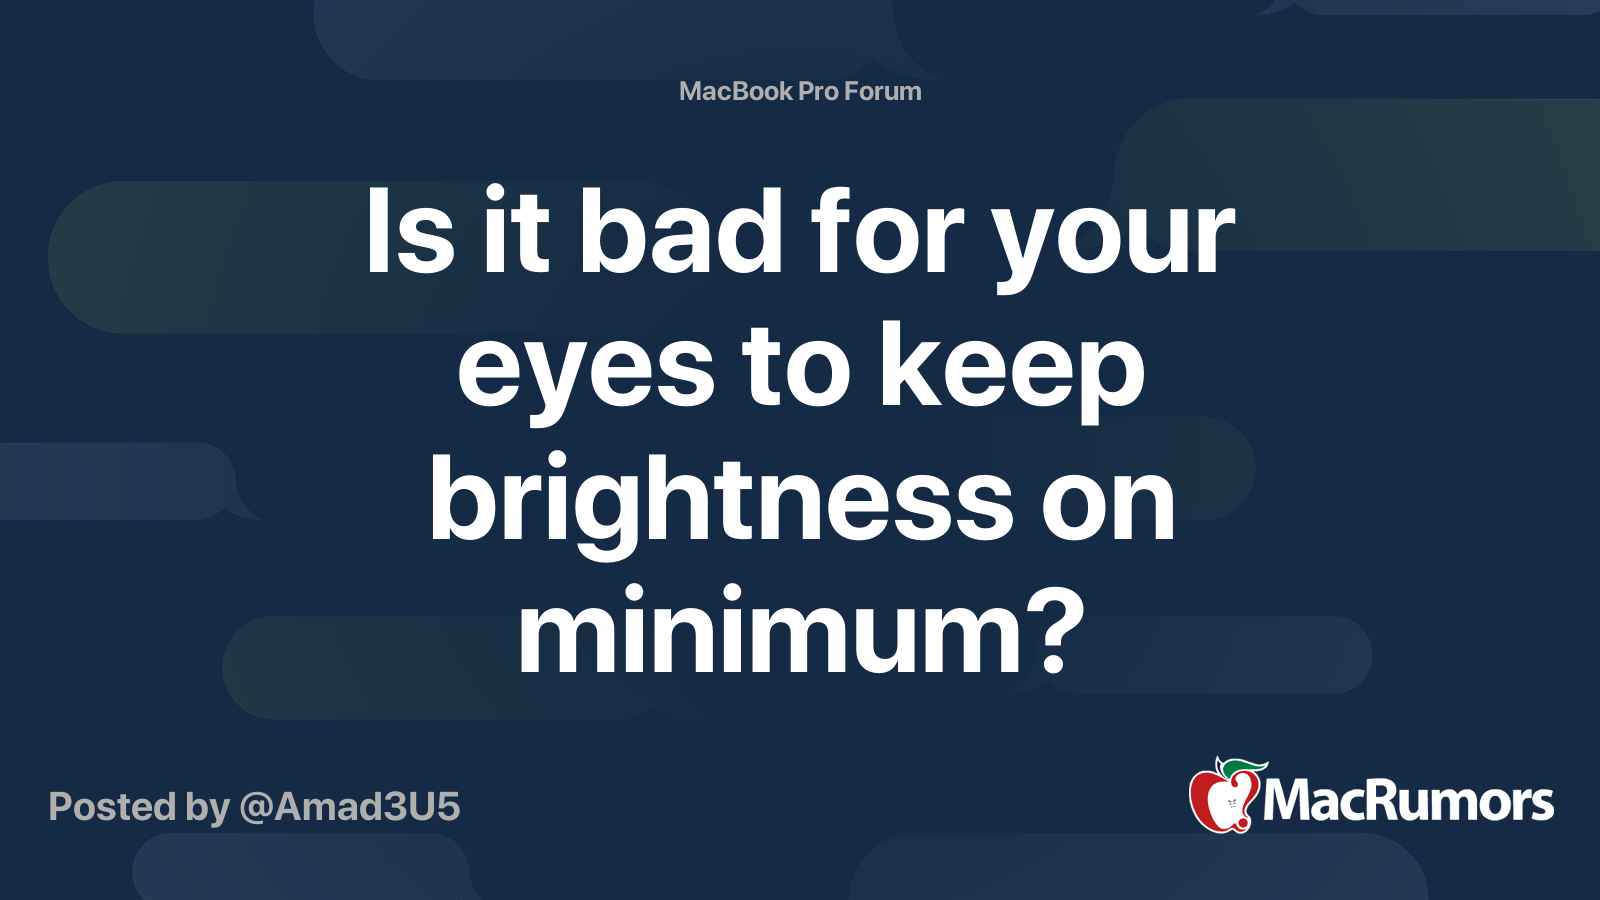 Is More brightness good for eyes?